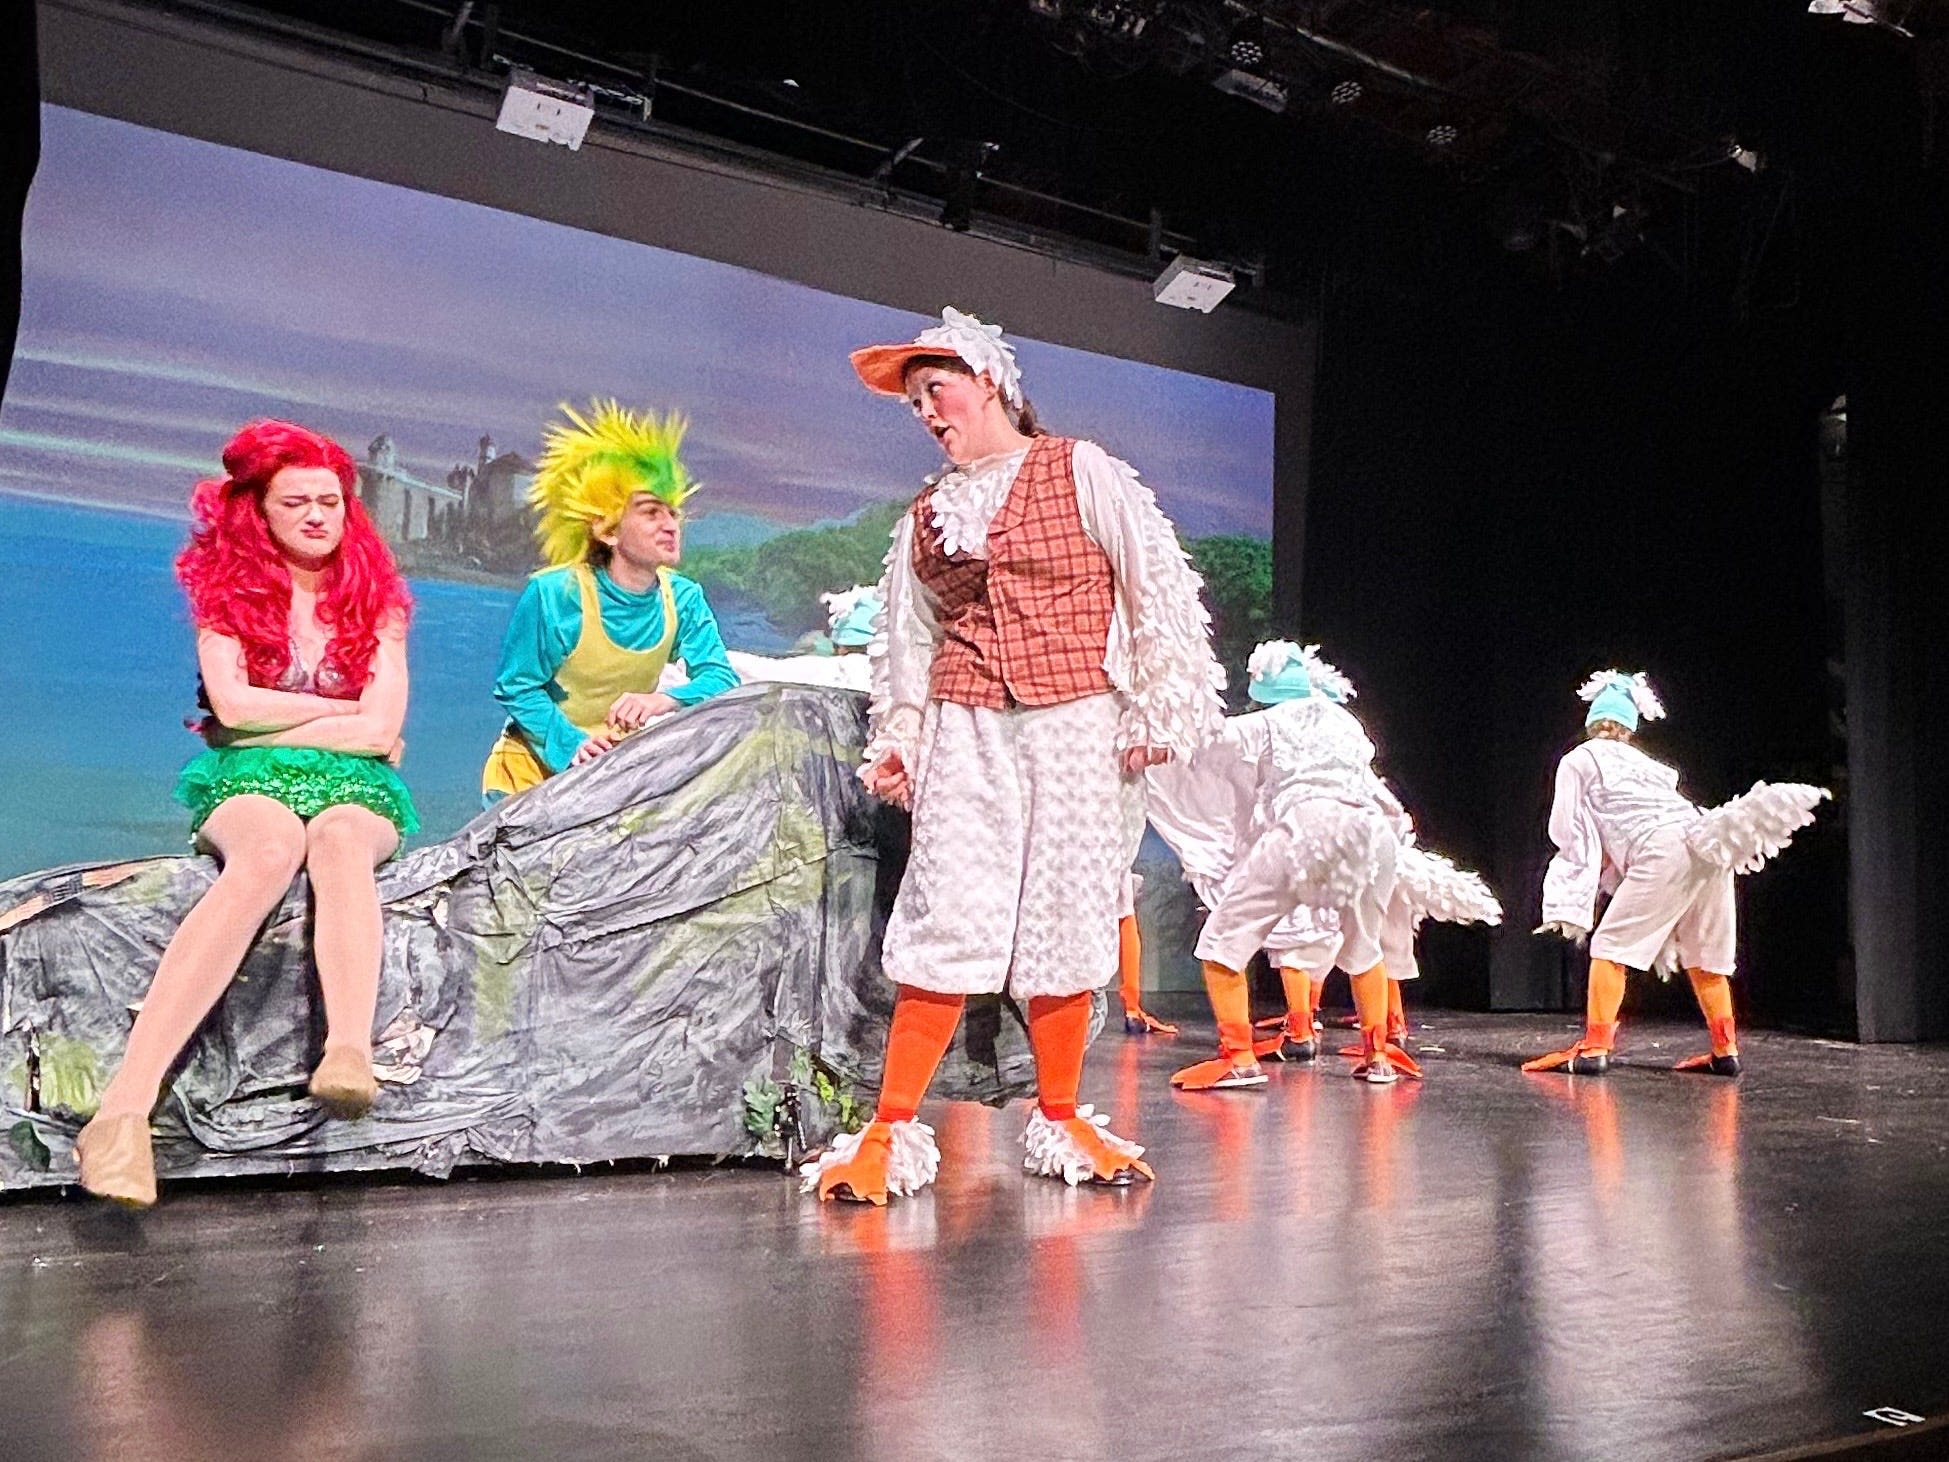 Savannah Children’s Theatre invites you to be part of their world with “The Little Mermaid”